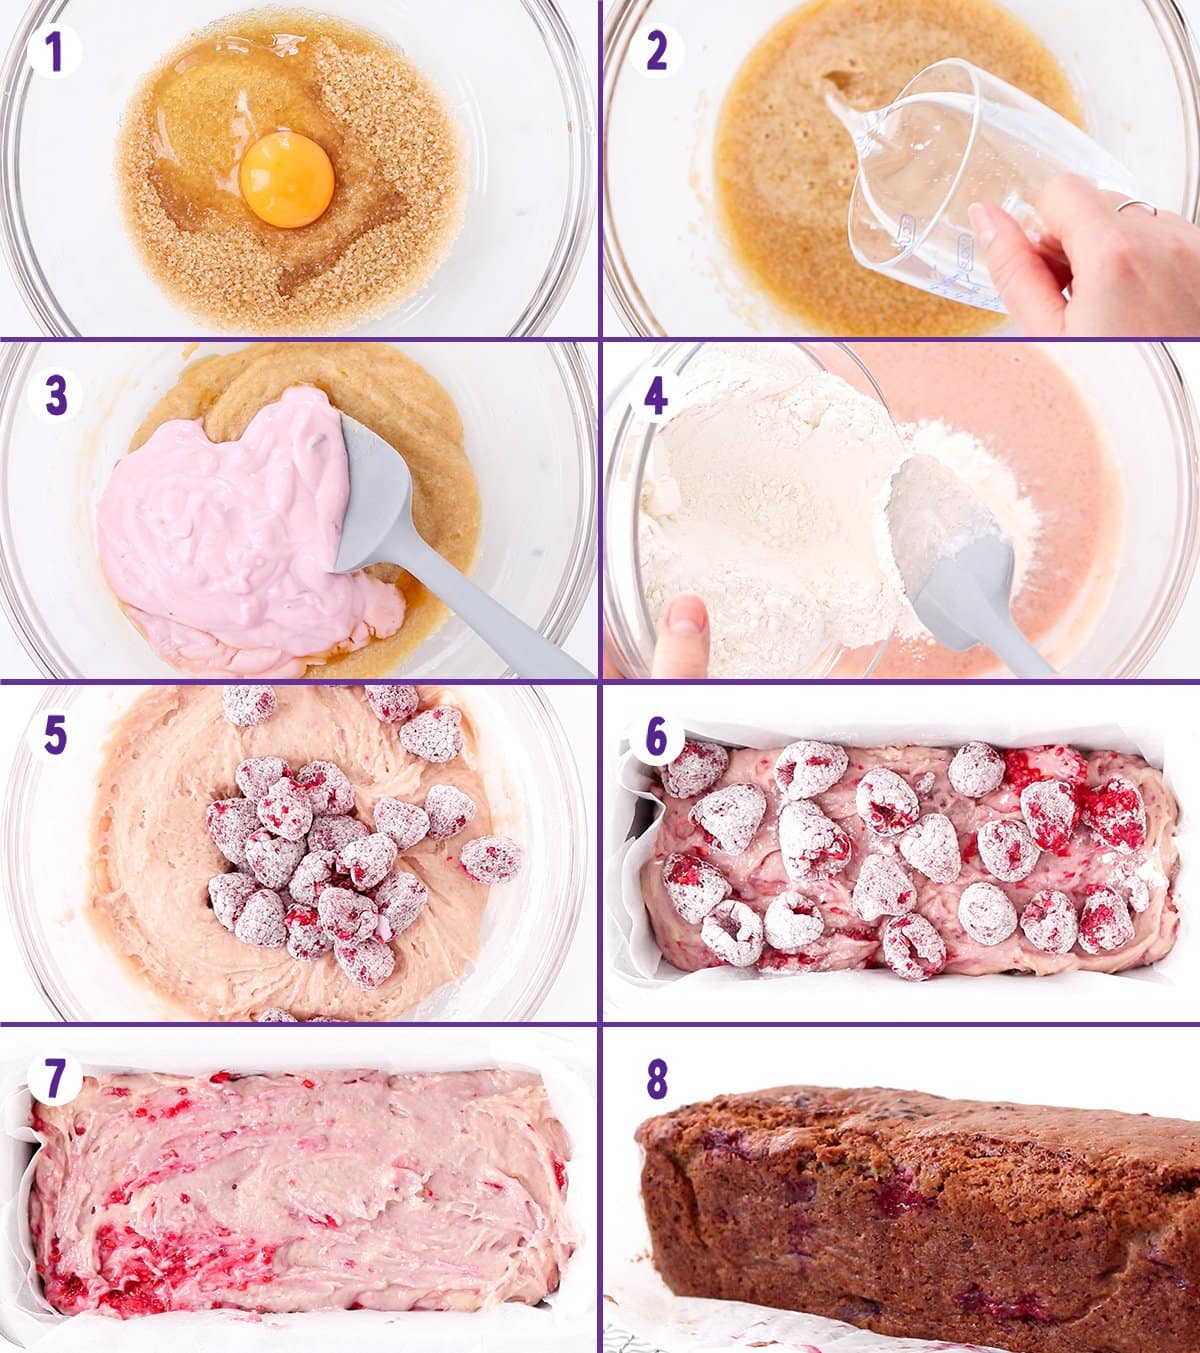 Collage of 8 images showing the process of making raspberry and white chocolate cake.